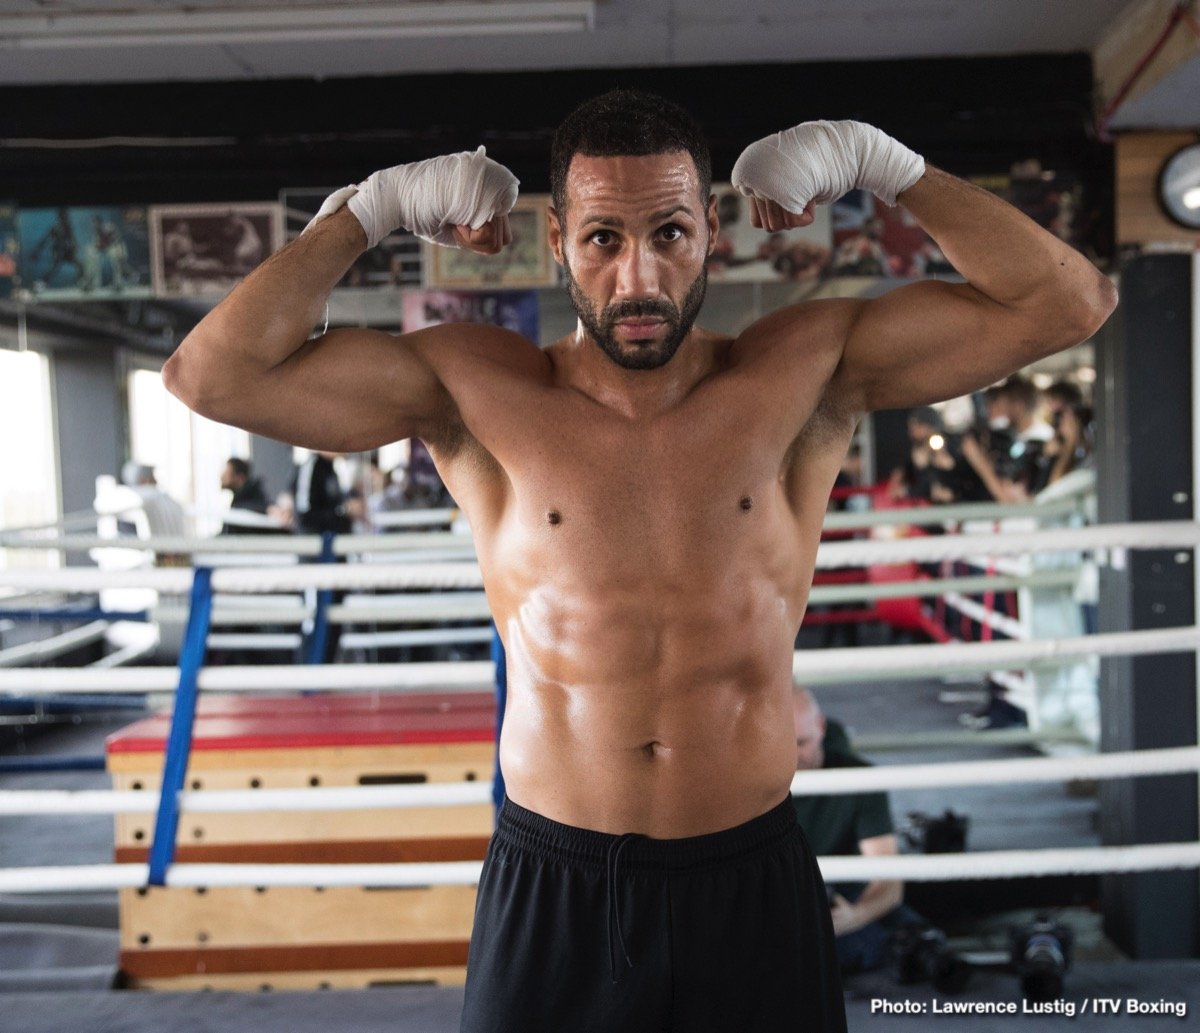 Lean and ripped James DeGale puts on power-packed display ahead of big fight